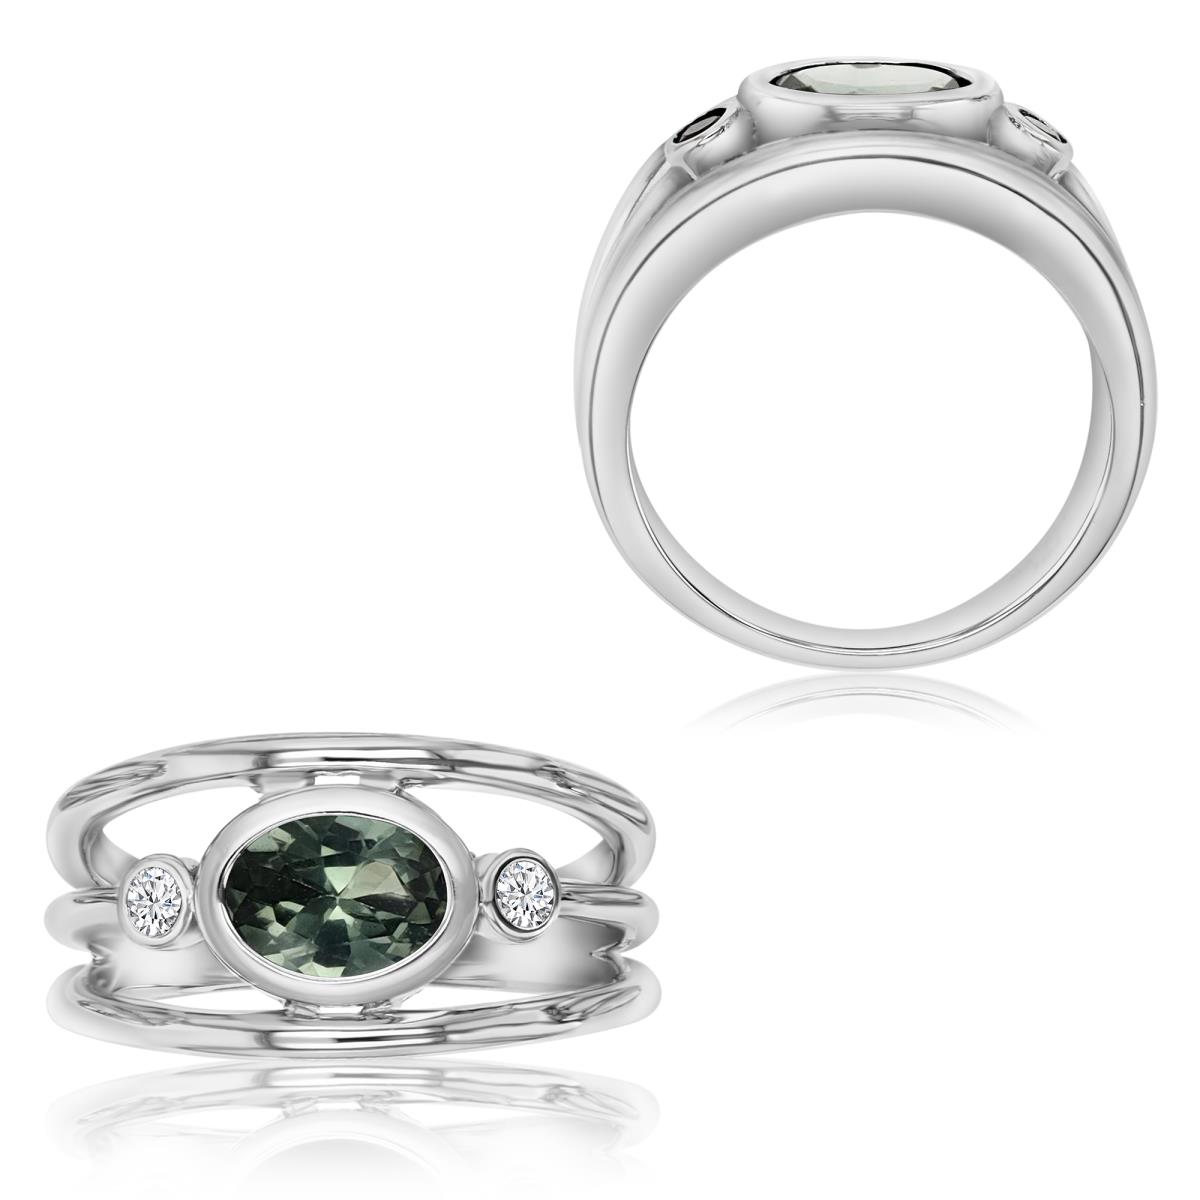 Sterling Silver Rhodium 8X6MM Polished Cr Green Spinel & Cr White Sapphire Oval Shape Wide Band Ring